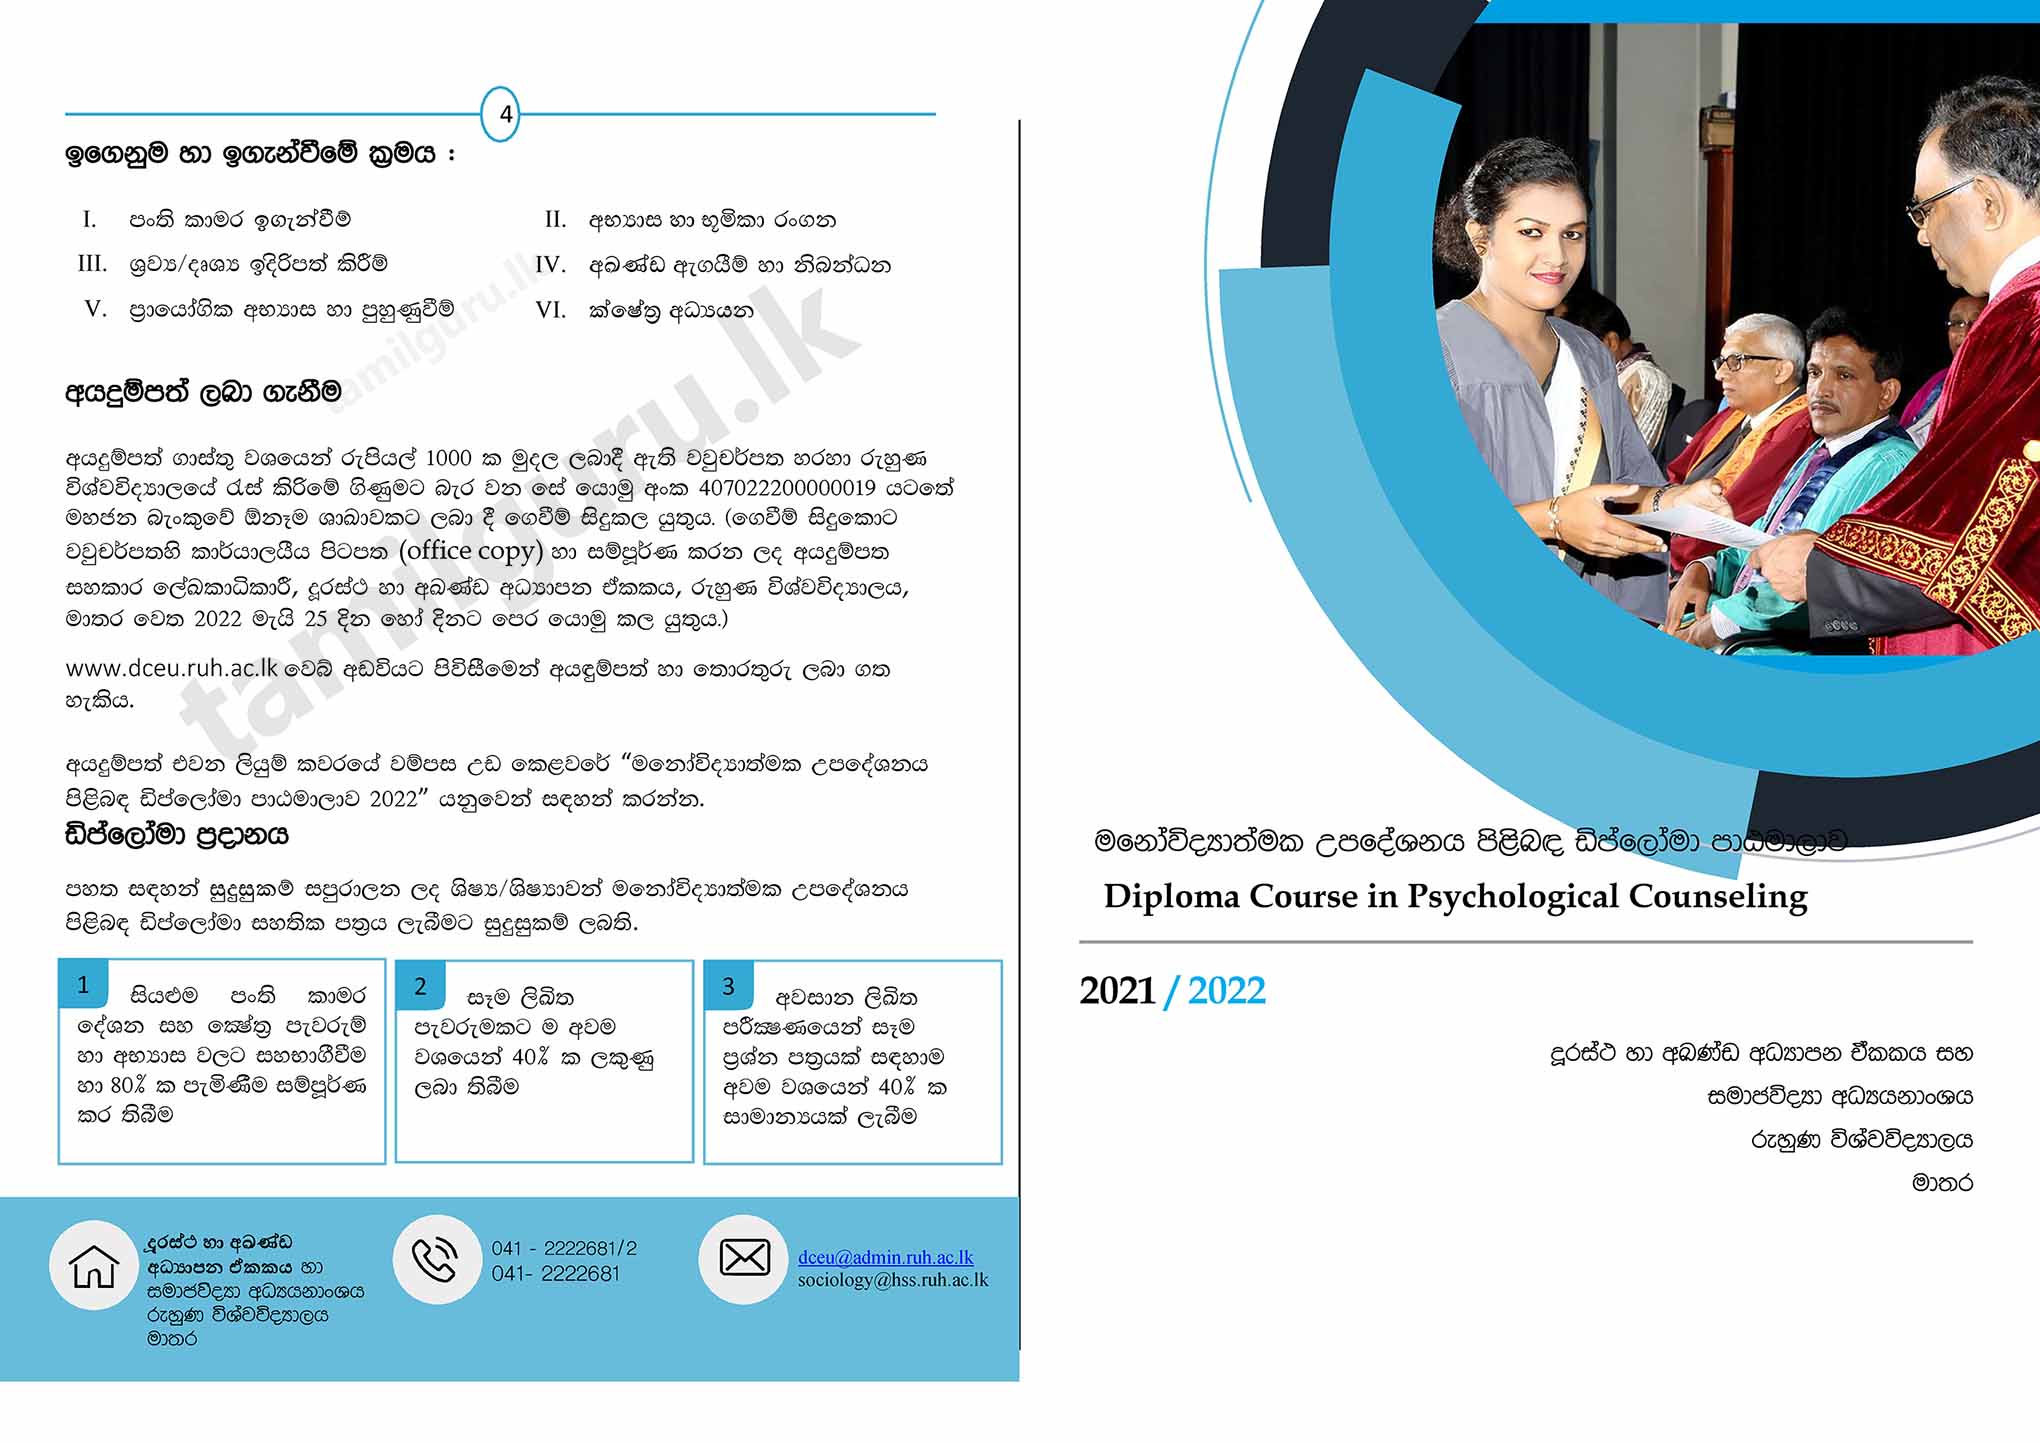 Calling Applications for Diploma Course in Psychological Counseling (2021/2022) Conducted by University of Ruhuna